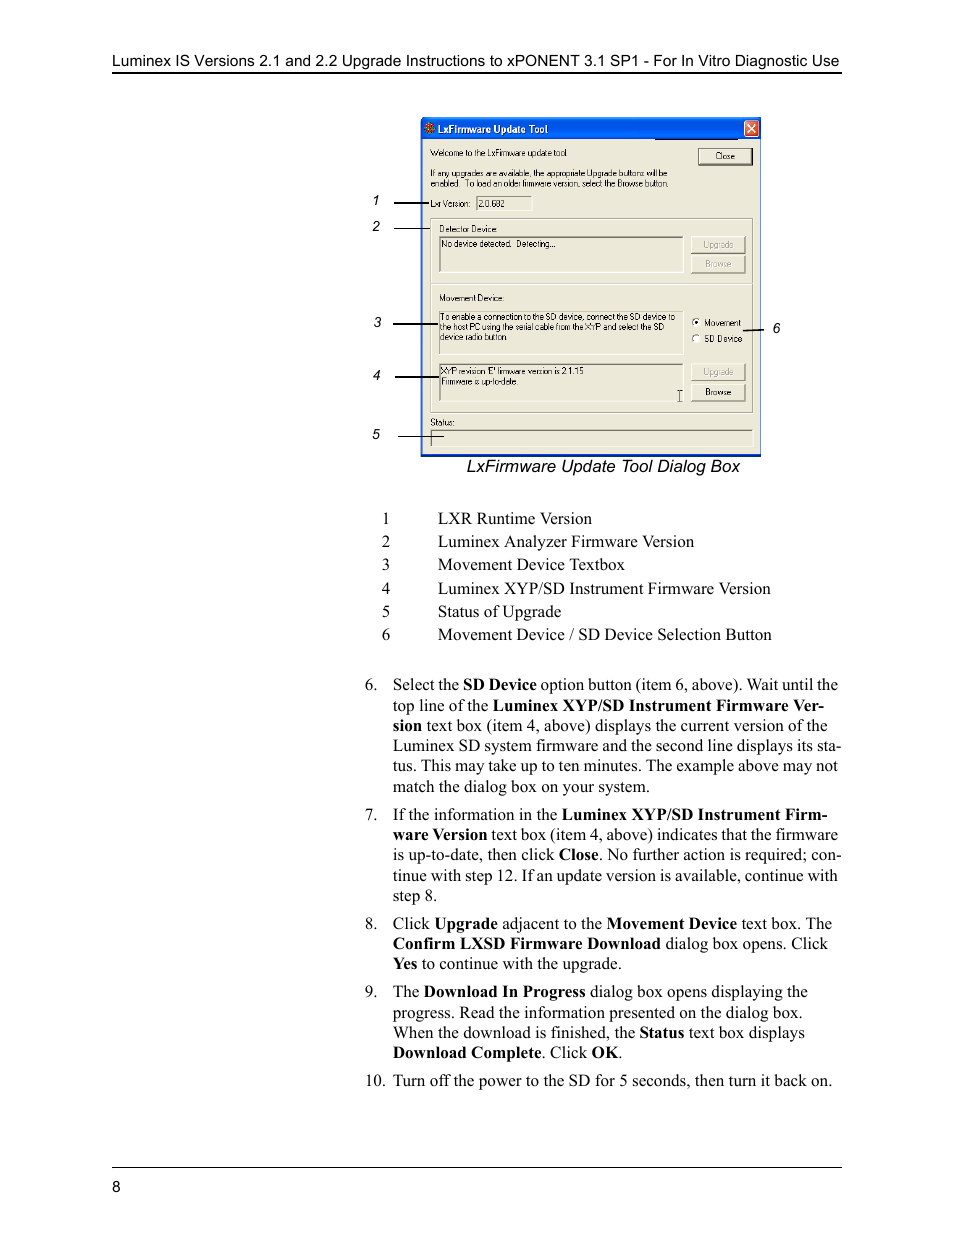 Luminex IS 2.1_2.2 to xPONENT 3.1 Rev 2 Upgrade Instructions User Manual | Page 12 / 16